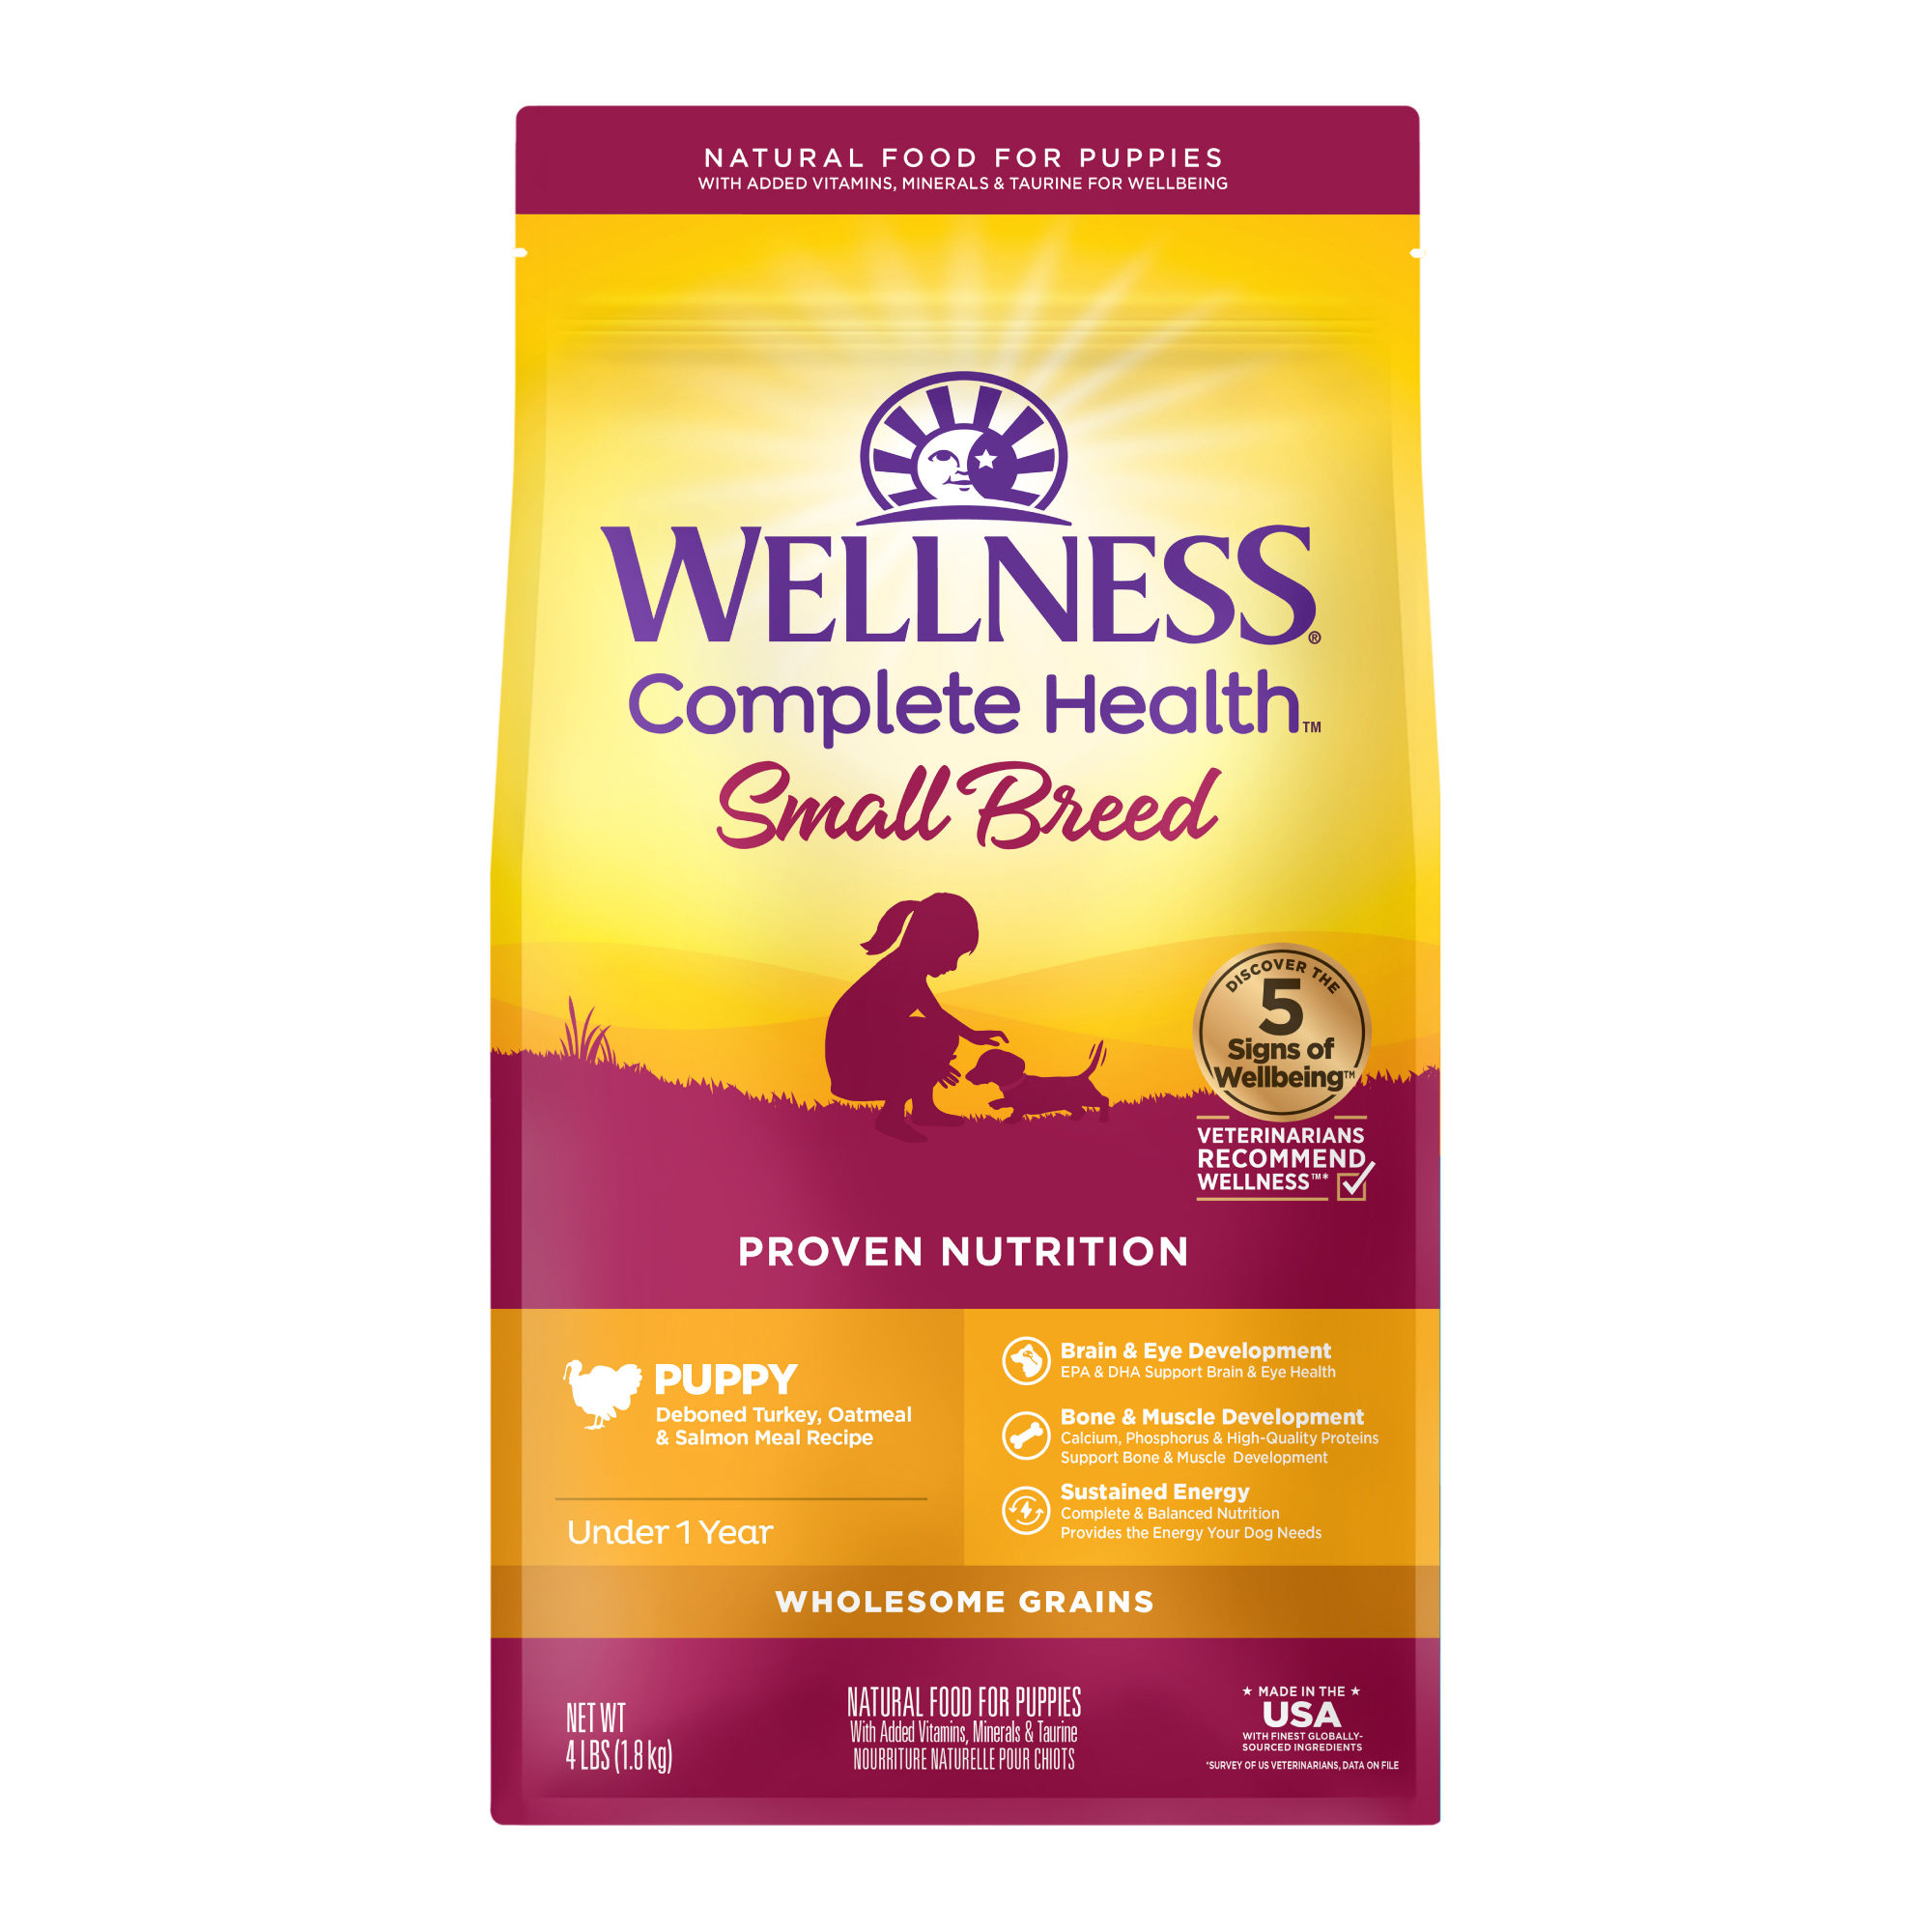 Wellness Complete Health Natural Small Breed Puppy Dry Dog Food, Turkey, Salmon & Oatmeal, 4-Pound Bag - image 1 of 10